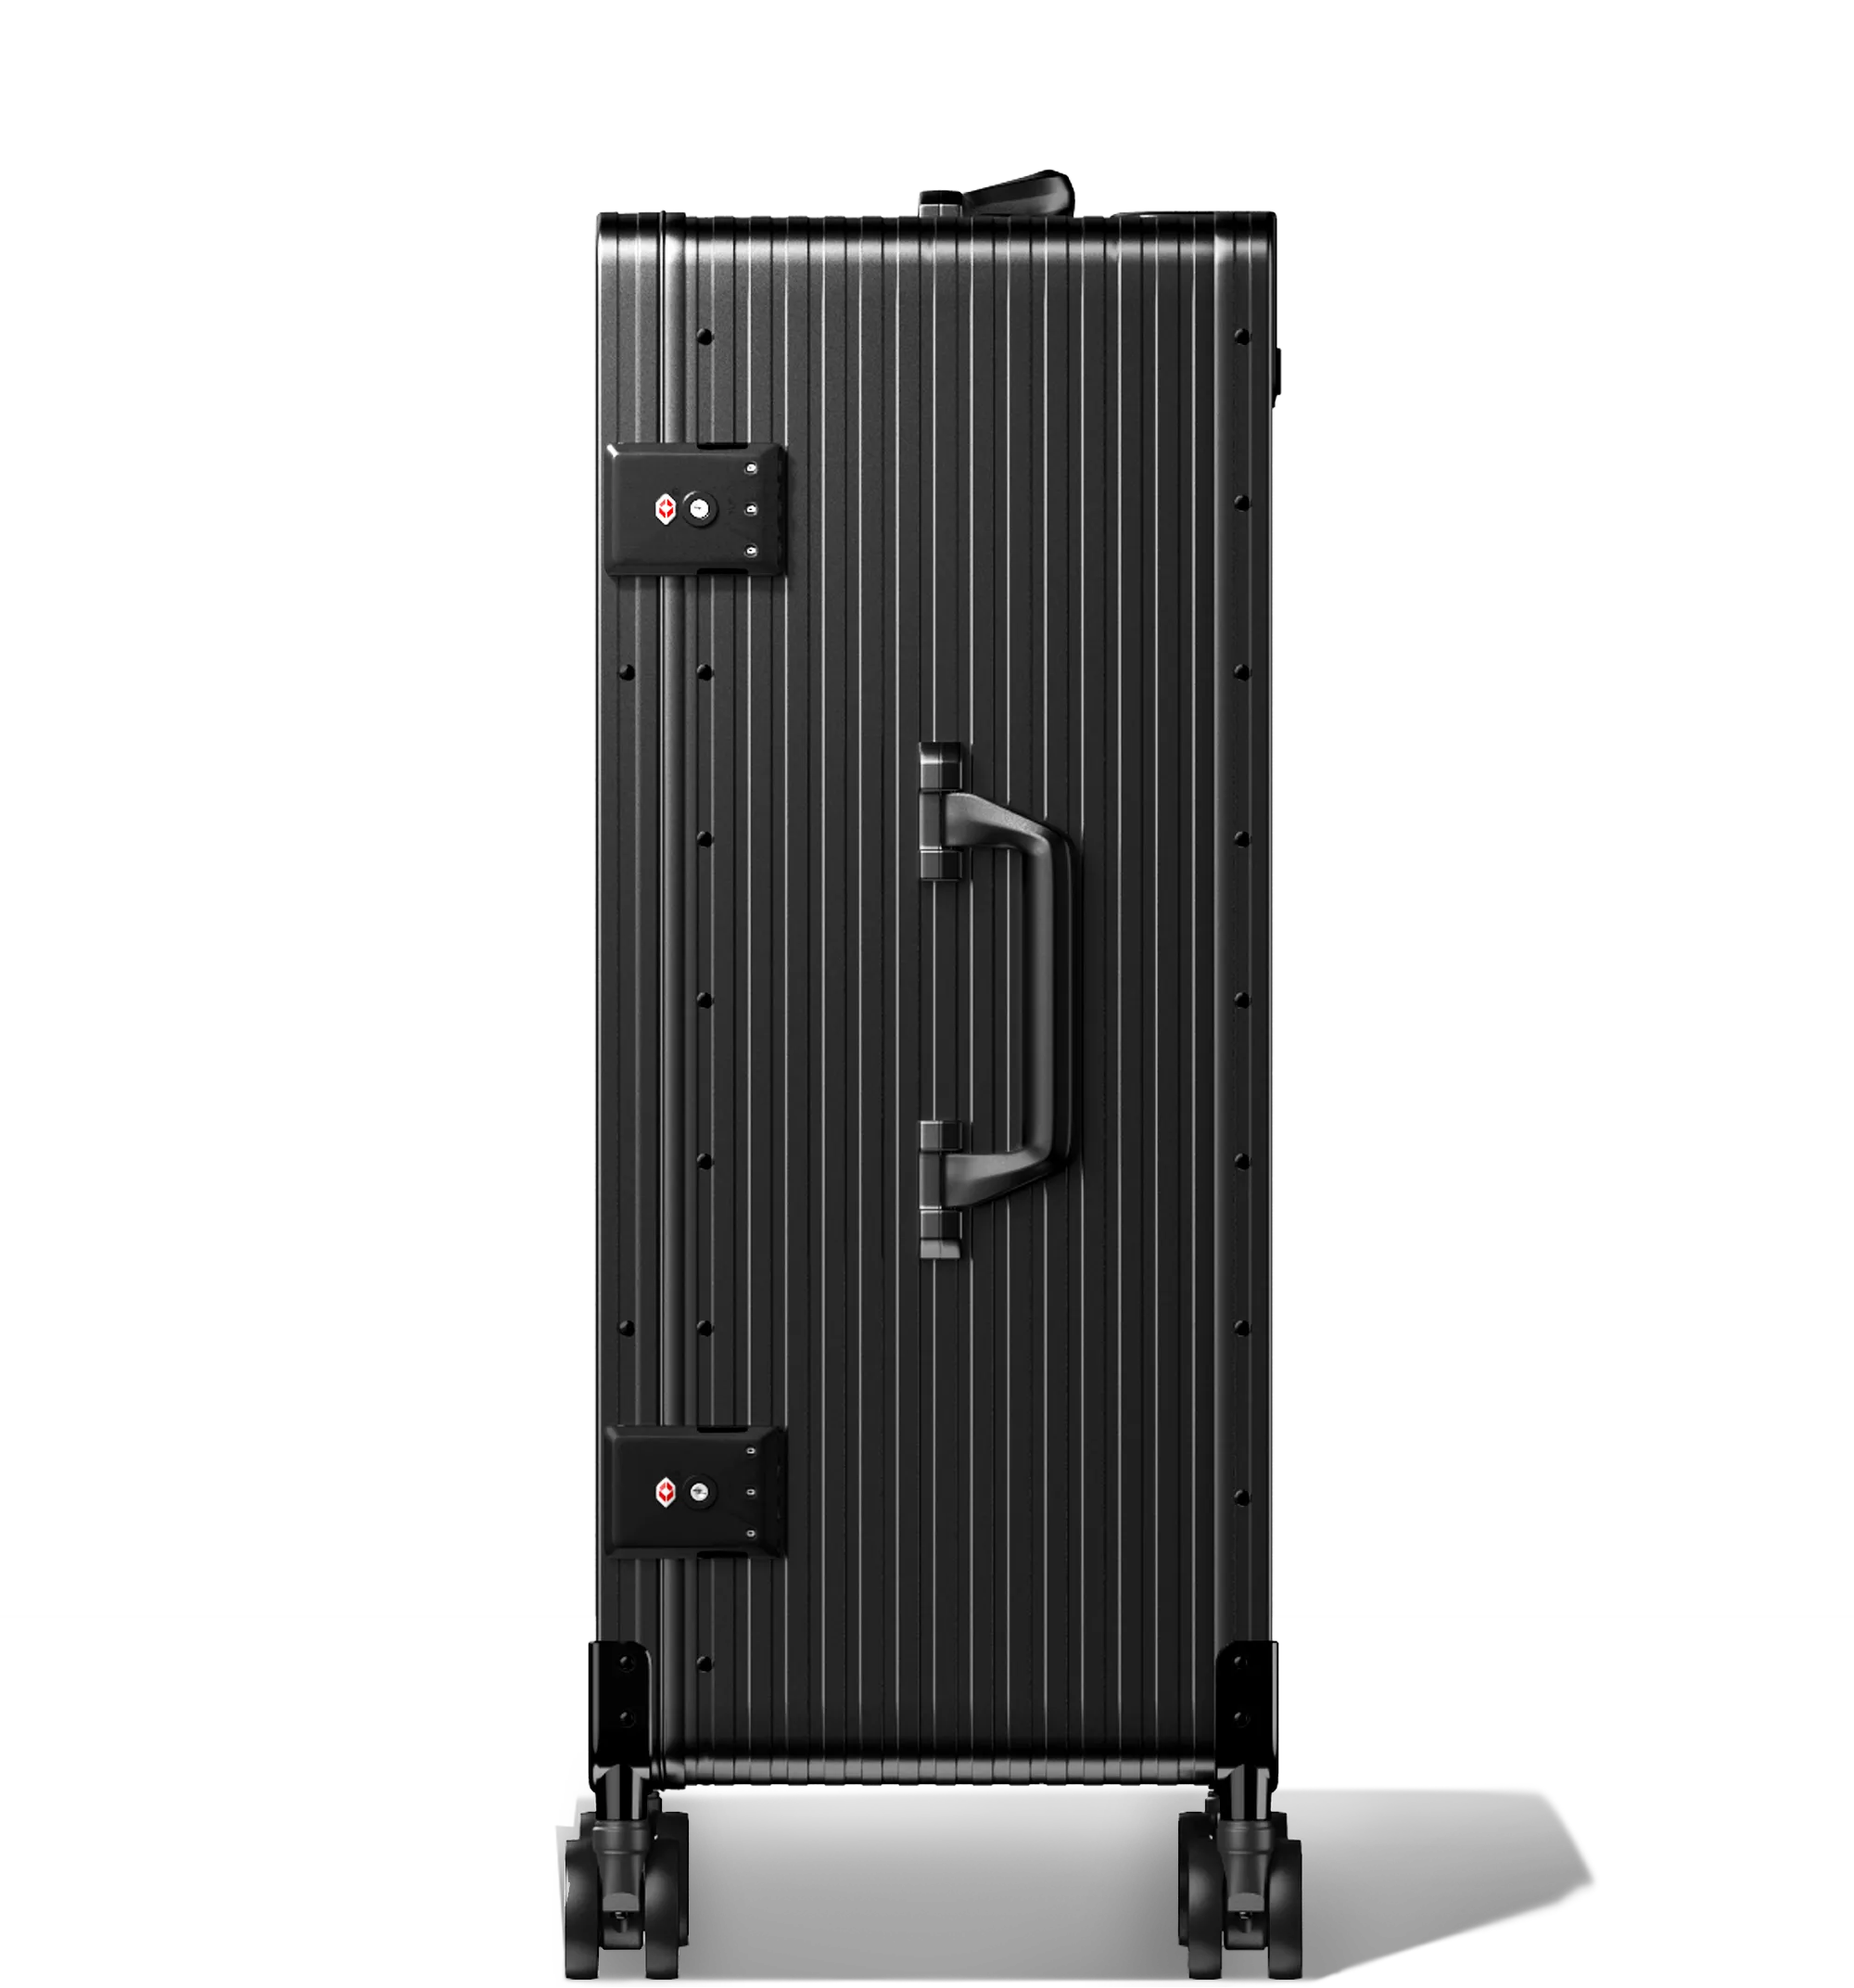 A black Check-In 65/25 hard-shell aluminium Luggage standing upright with ribbed texture, side and top carry handles, two TSA-approved combination locks, and four spinning wheels, against a white background.